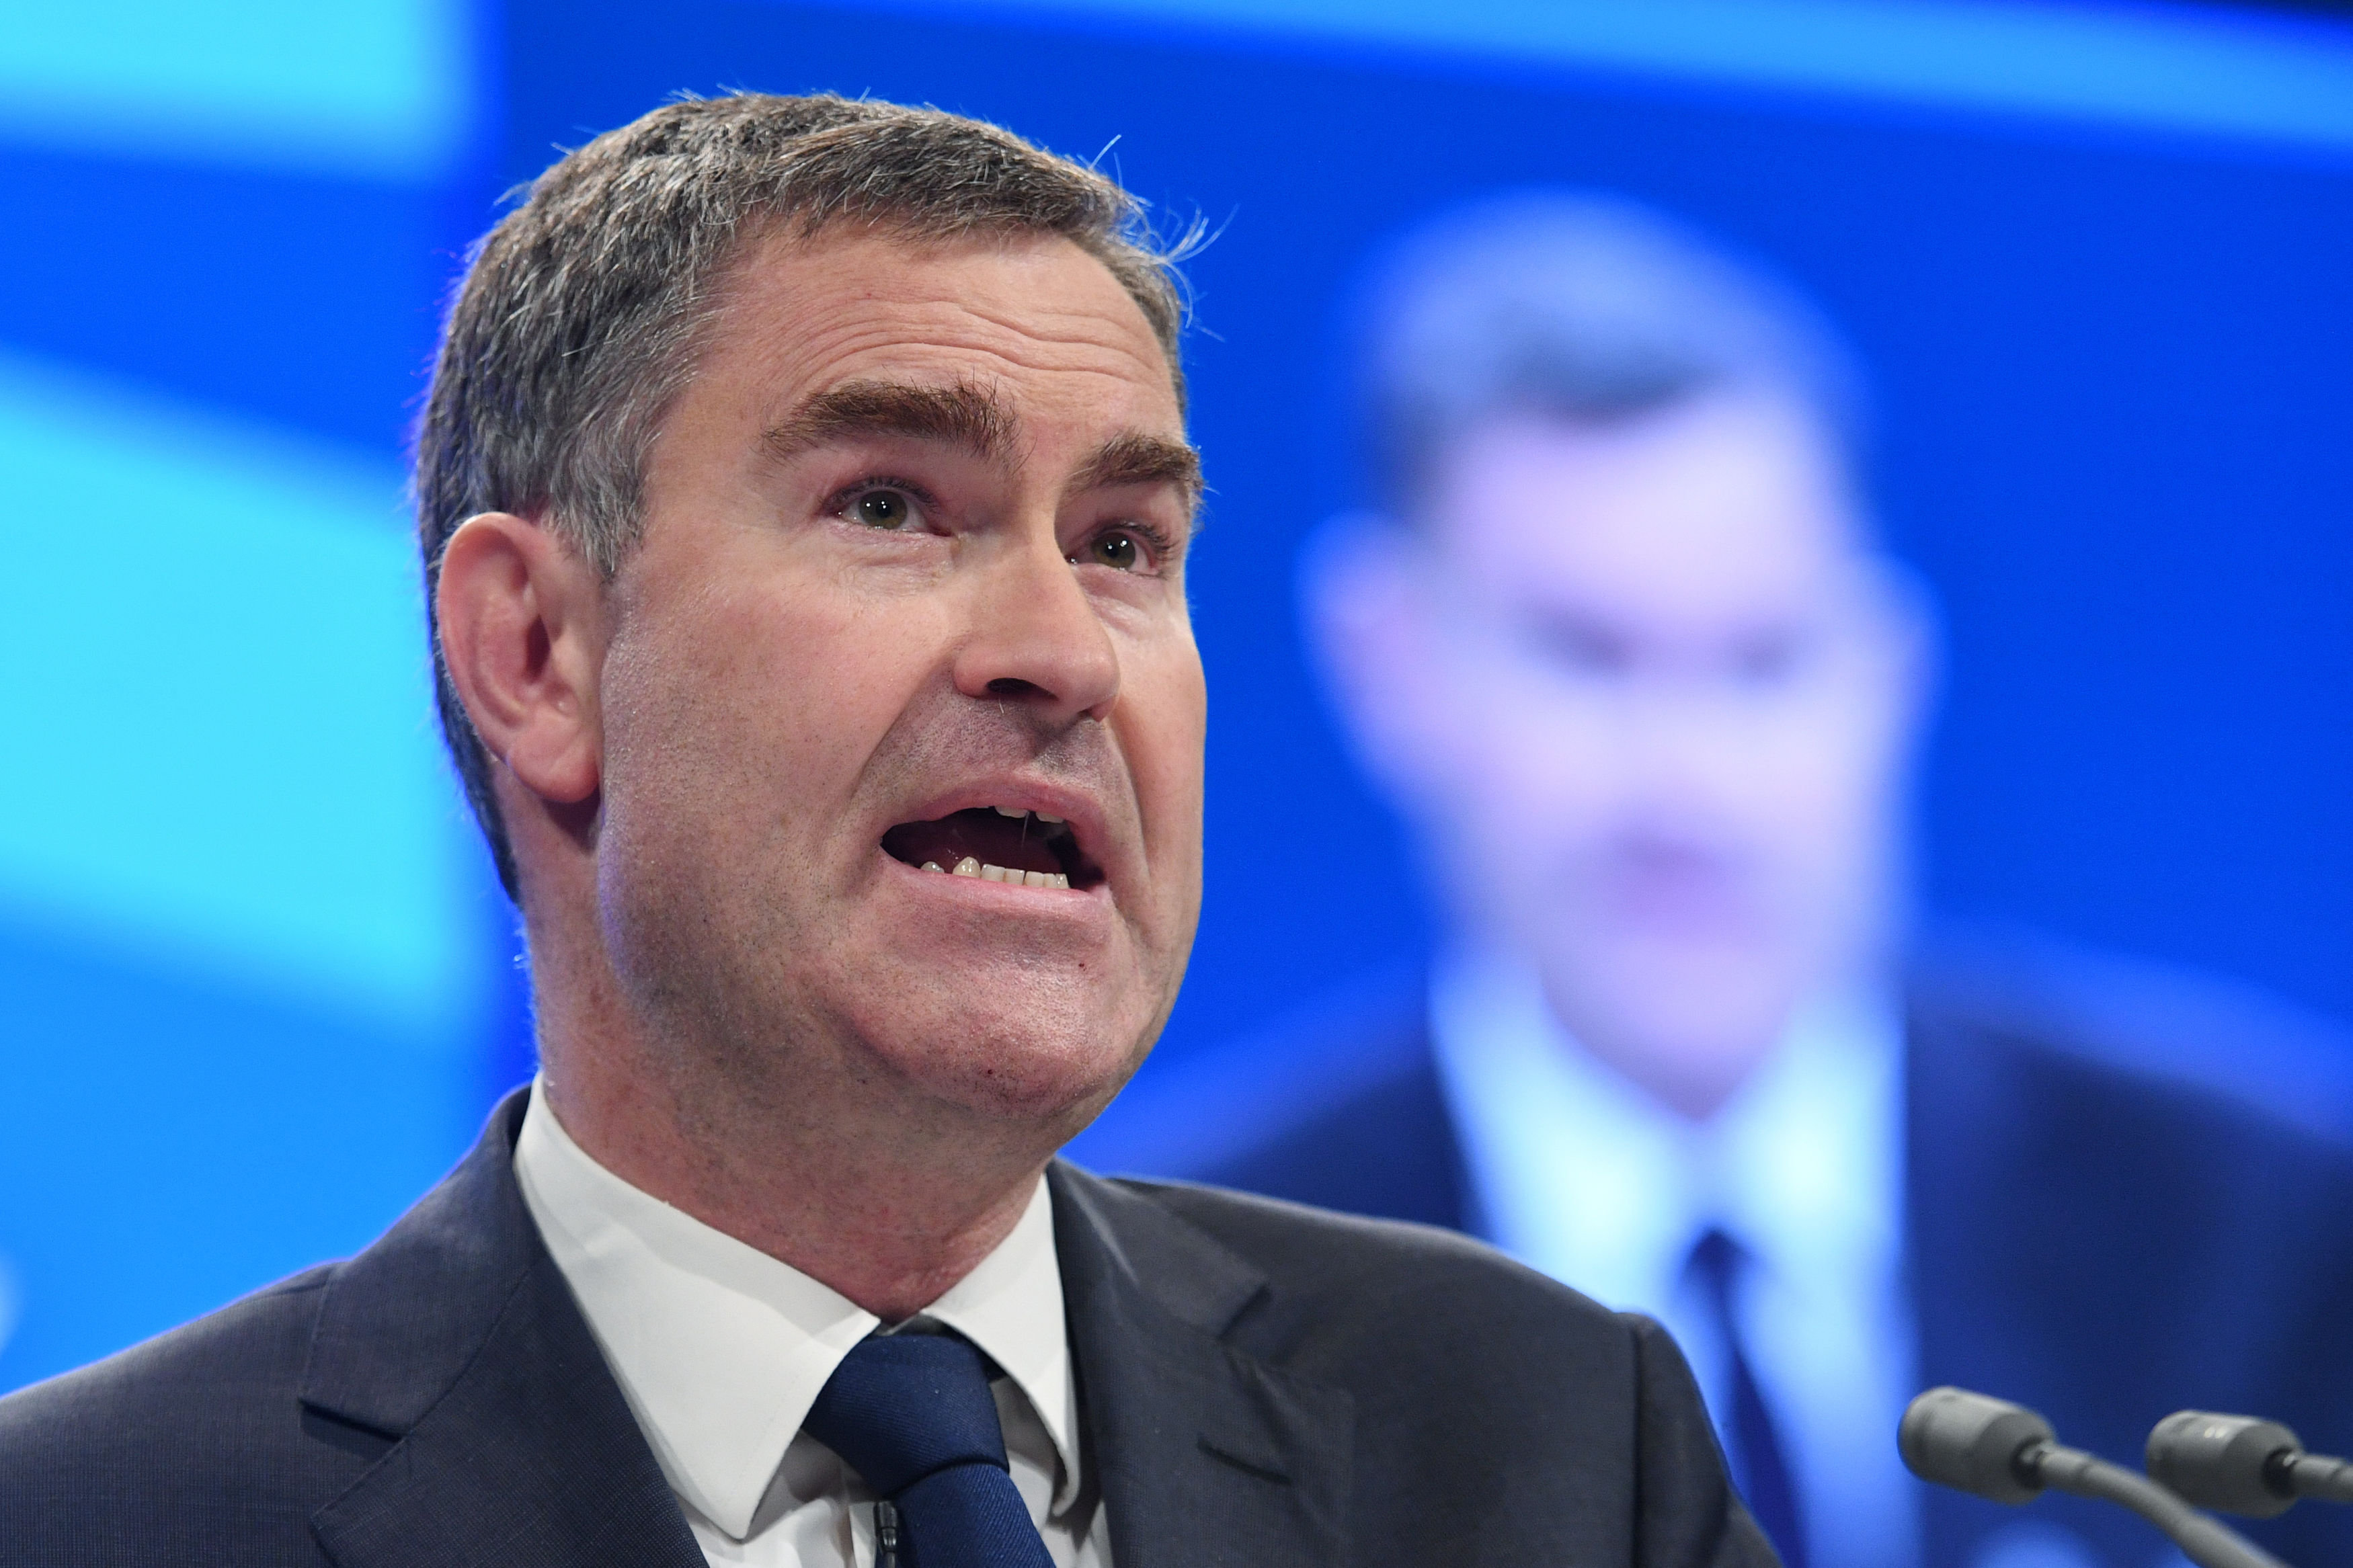 Work and pensions secretary David Gauke is responsible for the roll-out of Universal Credit